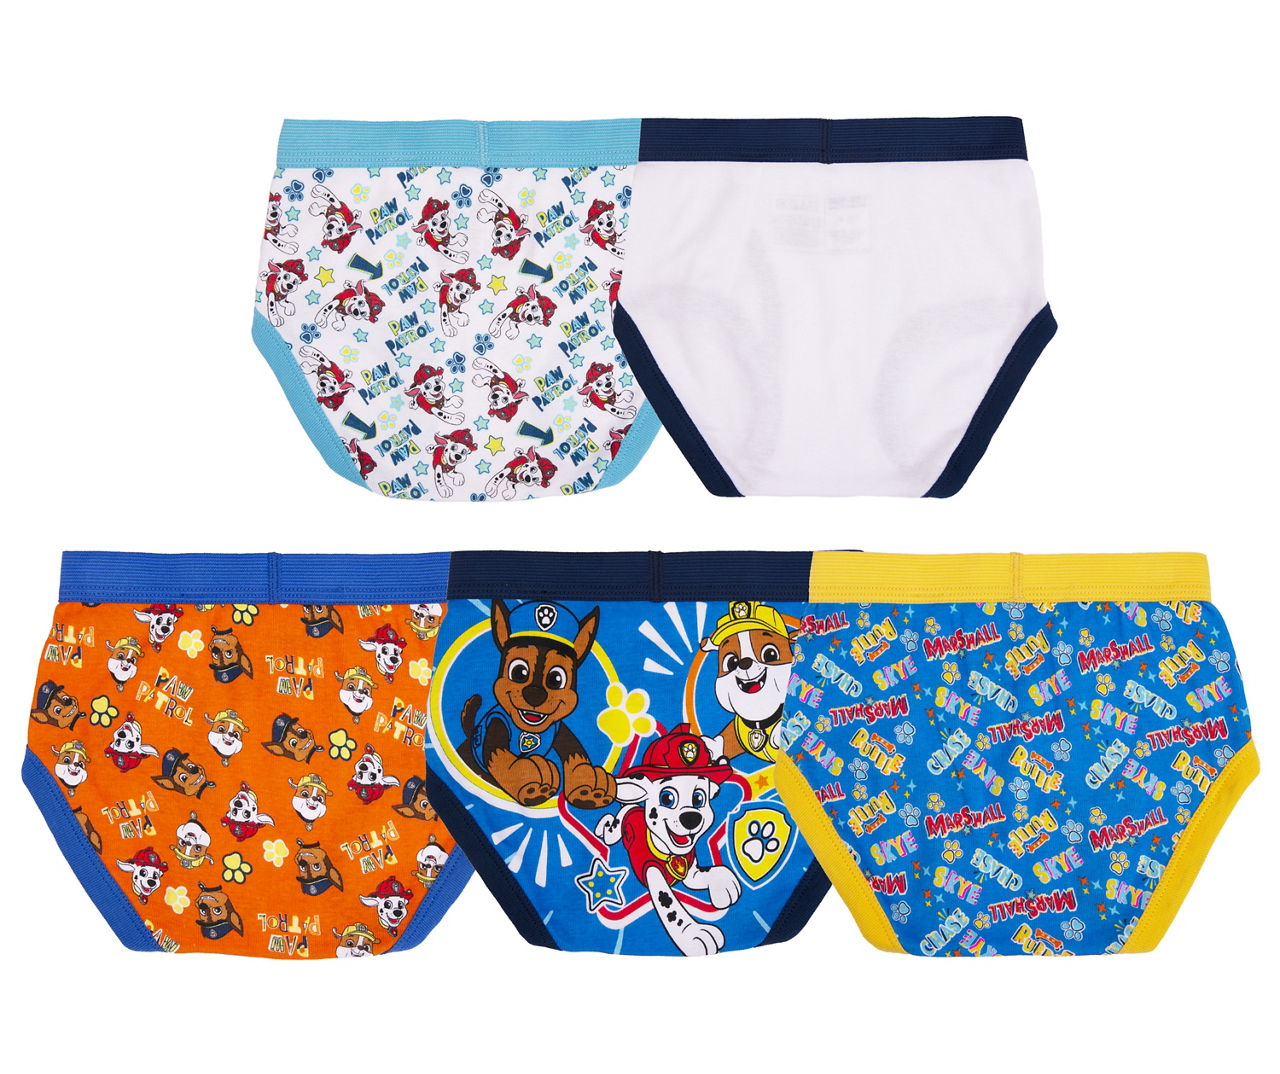 Paw Patrol Toddler Size 2T/3T Blue, Navy & White Briefs With